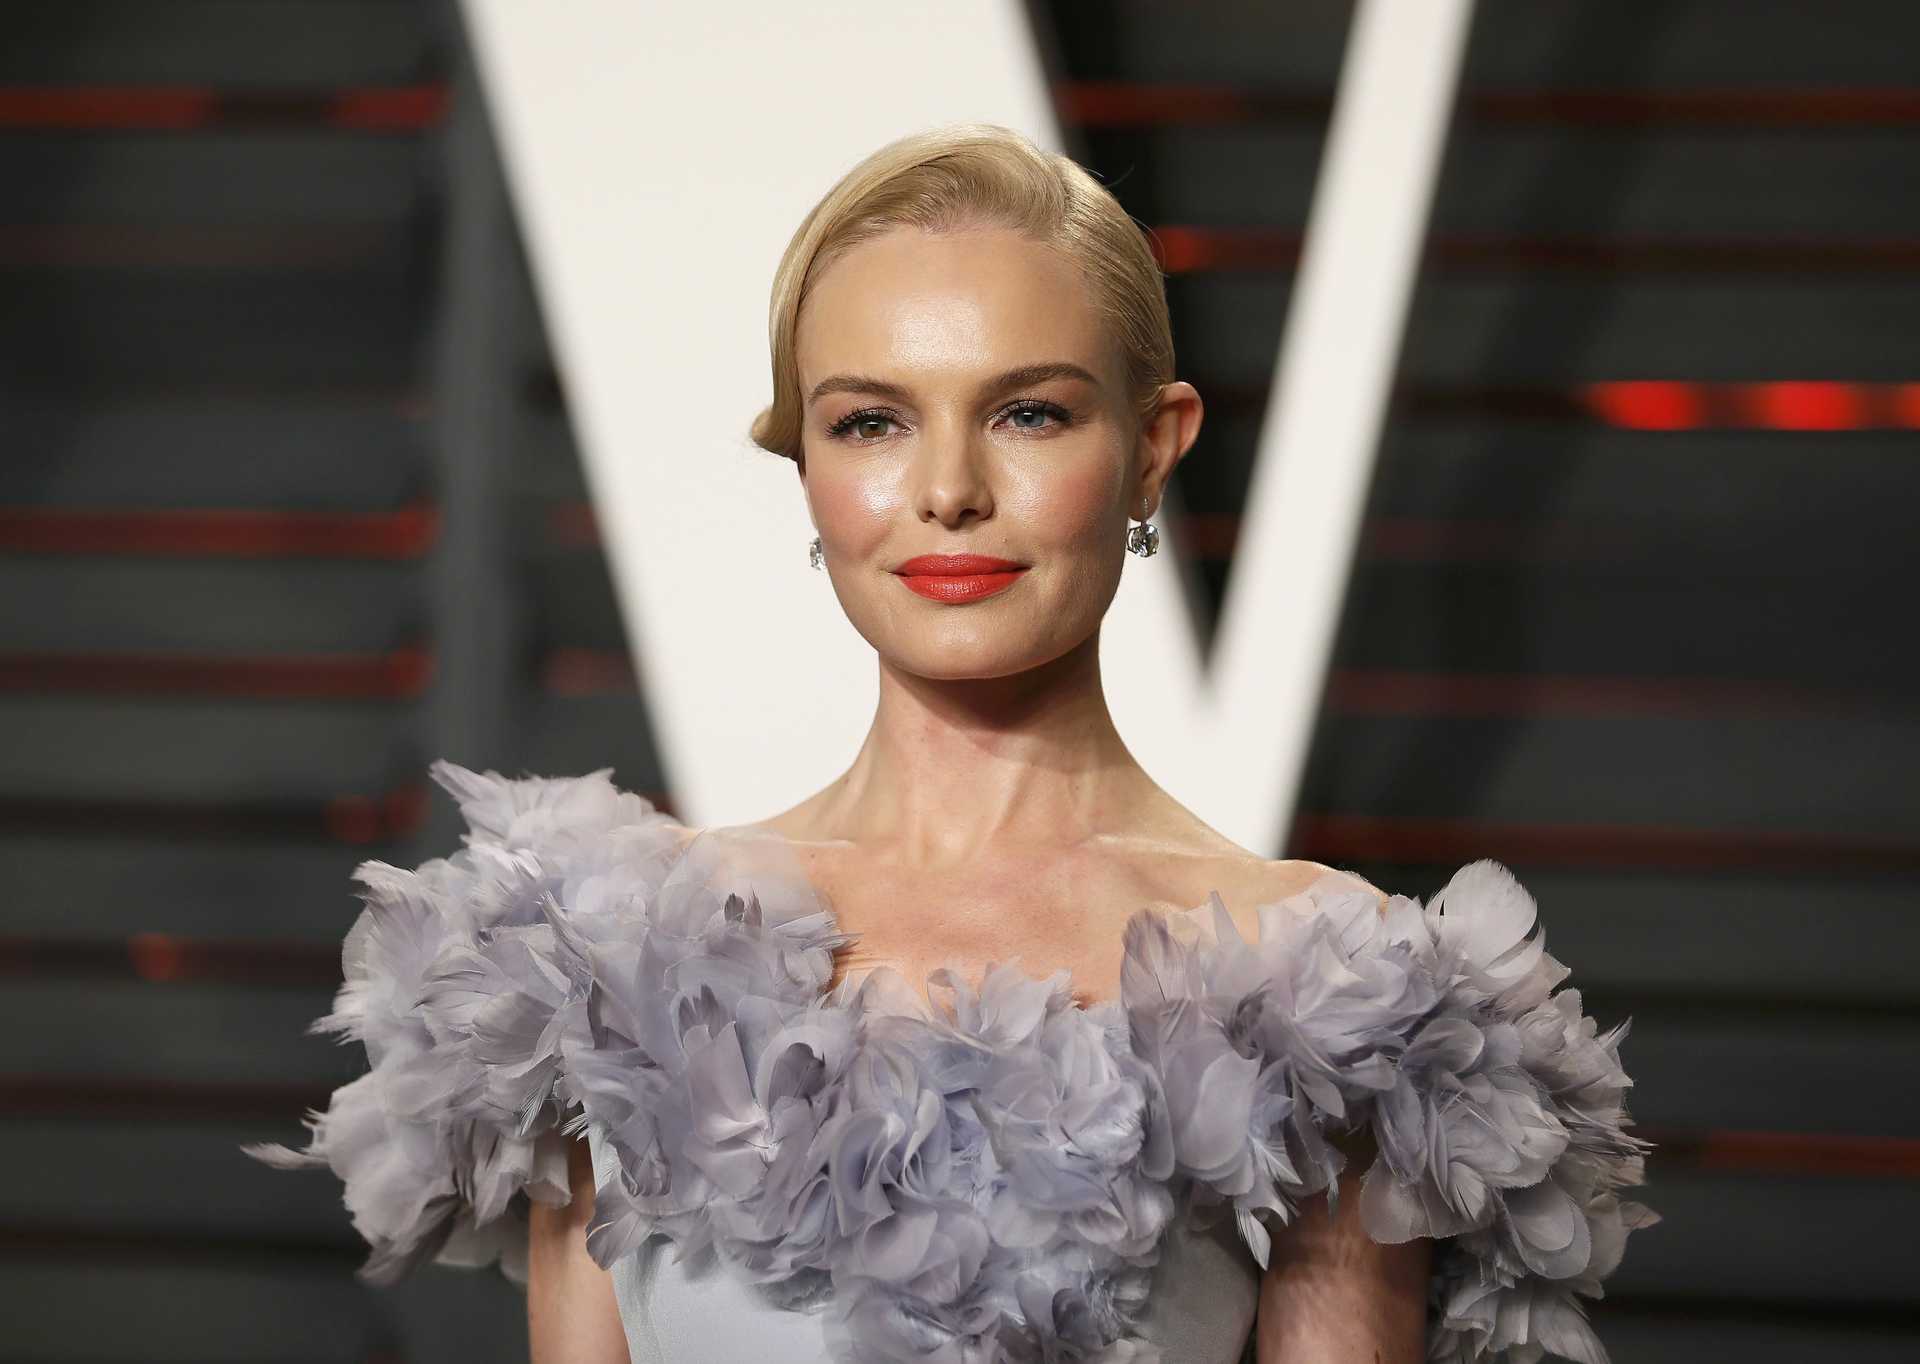 Actress Kate Bosworth arrives at the Vanity Fair Oscar Party in Beverly Hills